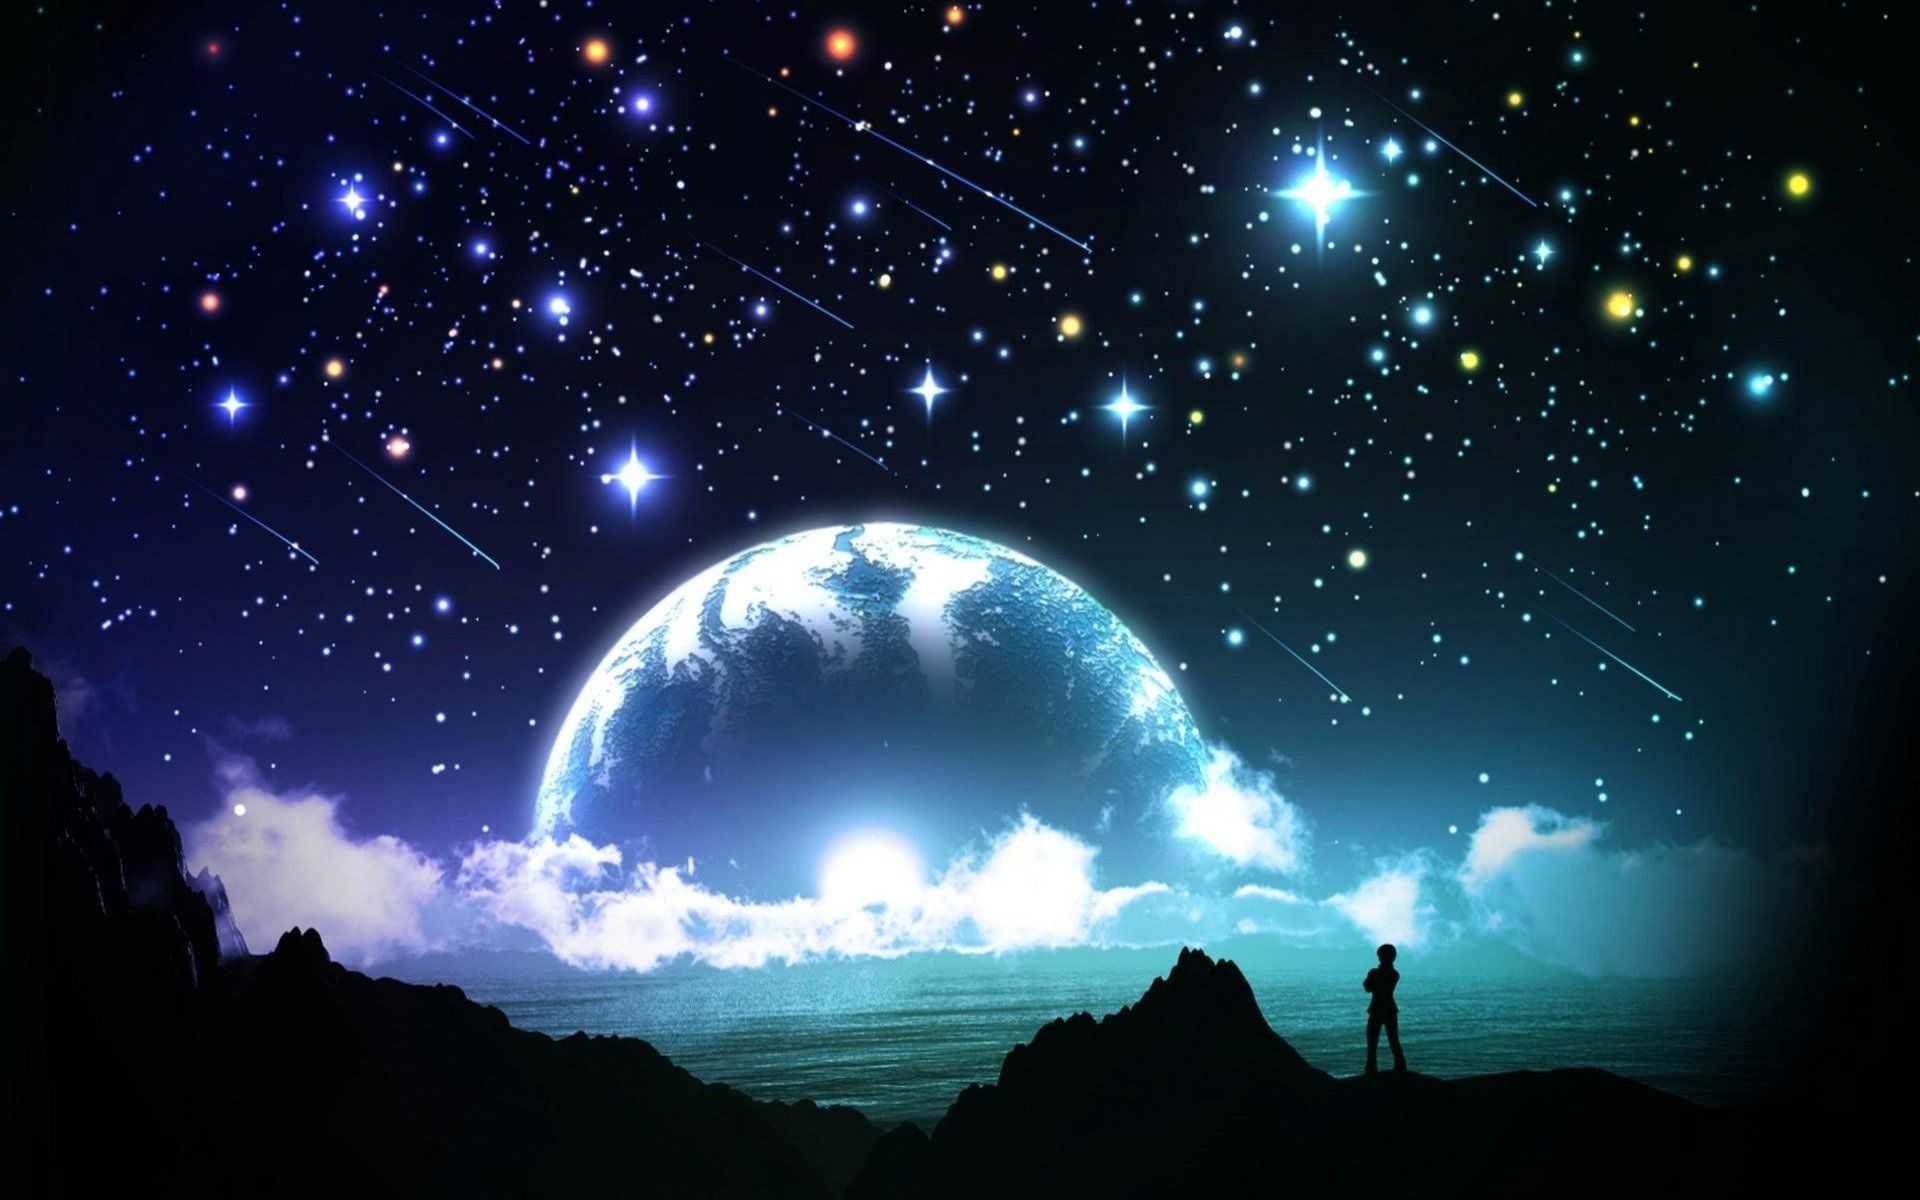 Person standing on a hill looking at a starry sky - Stars, moon